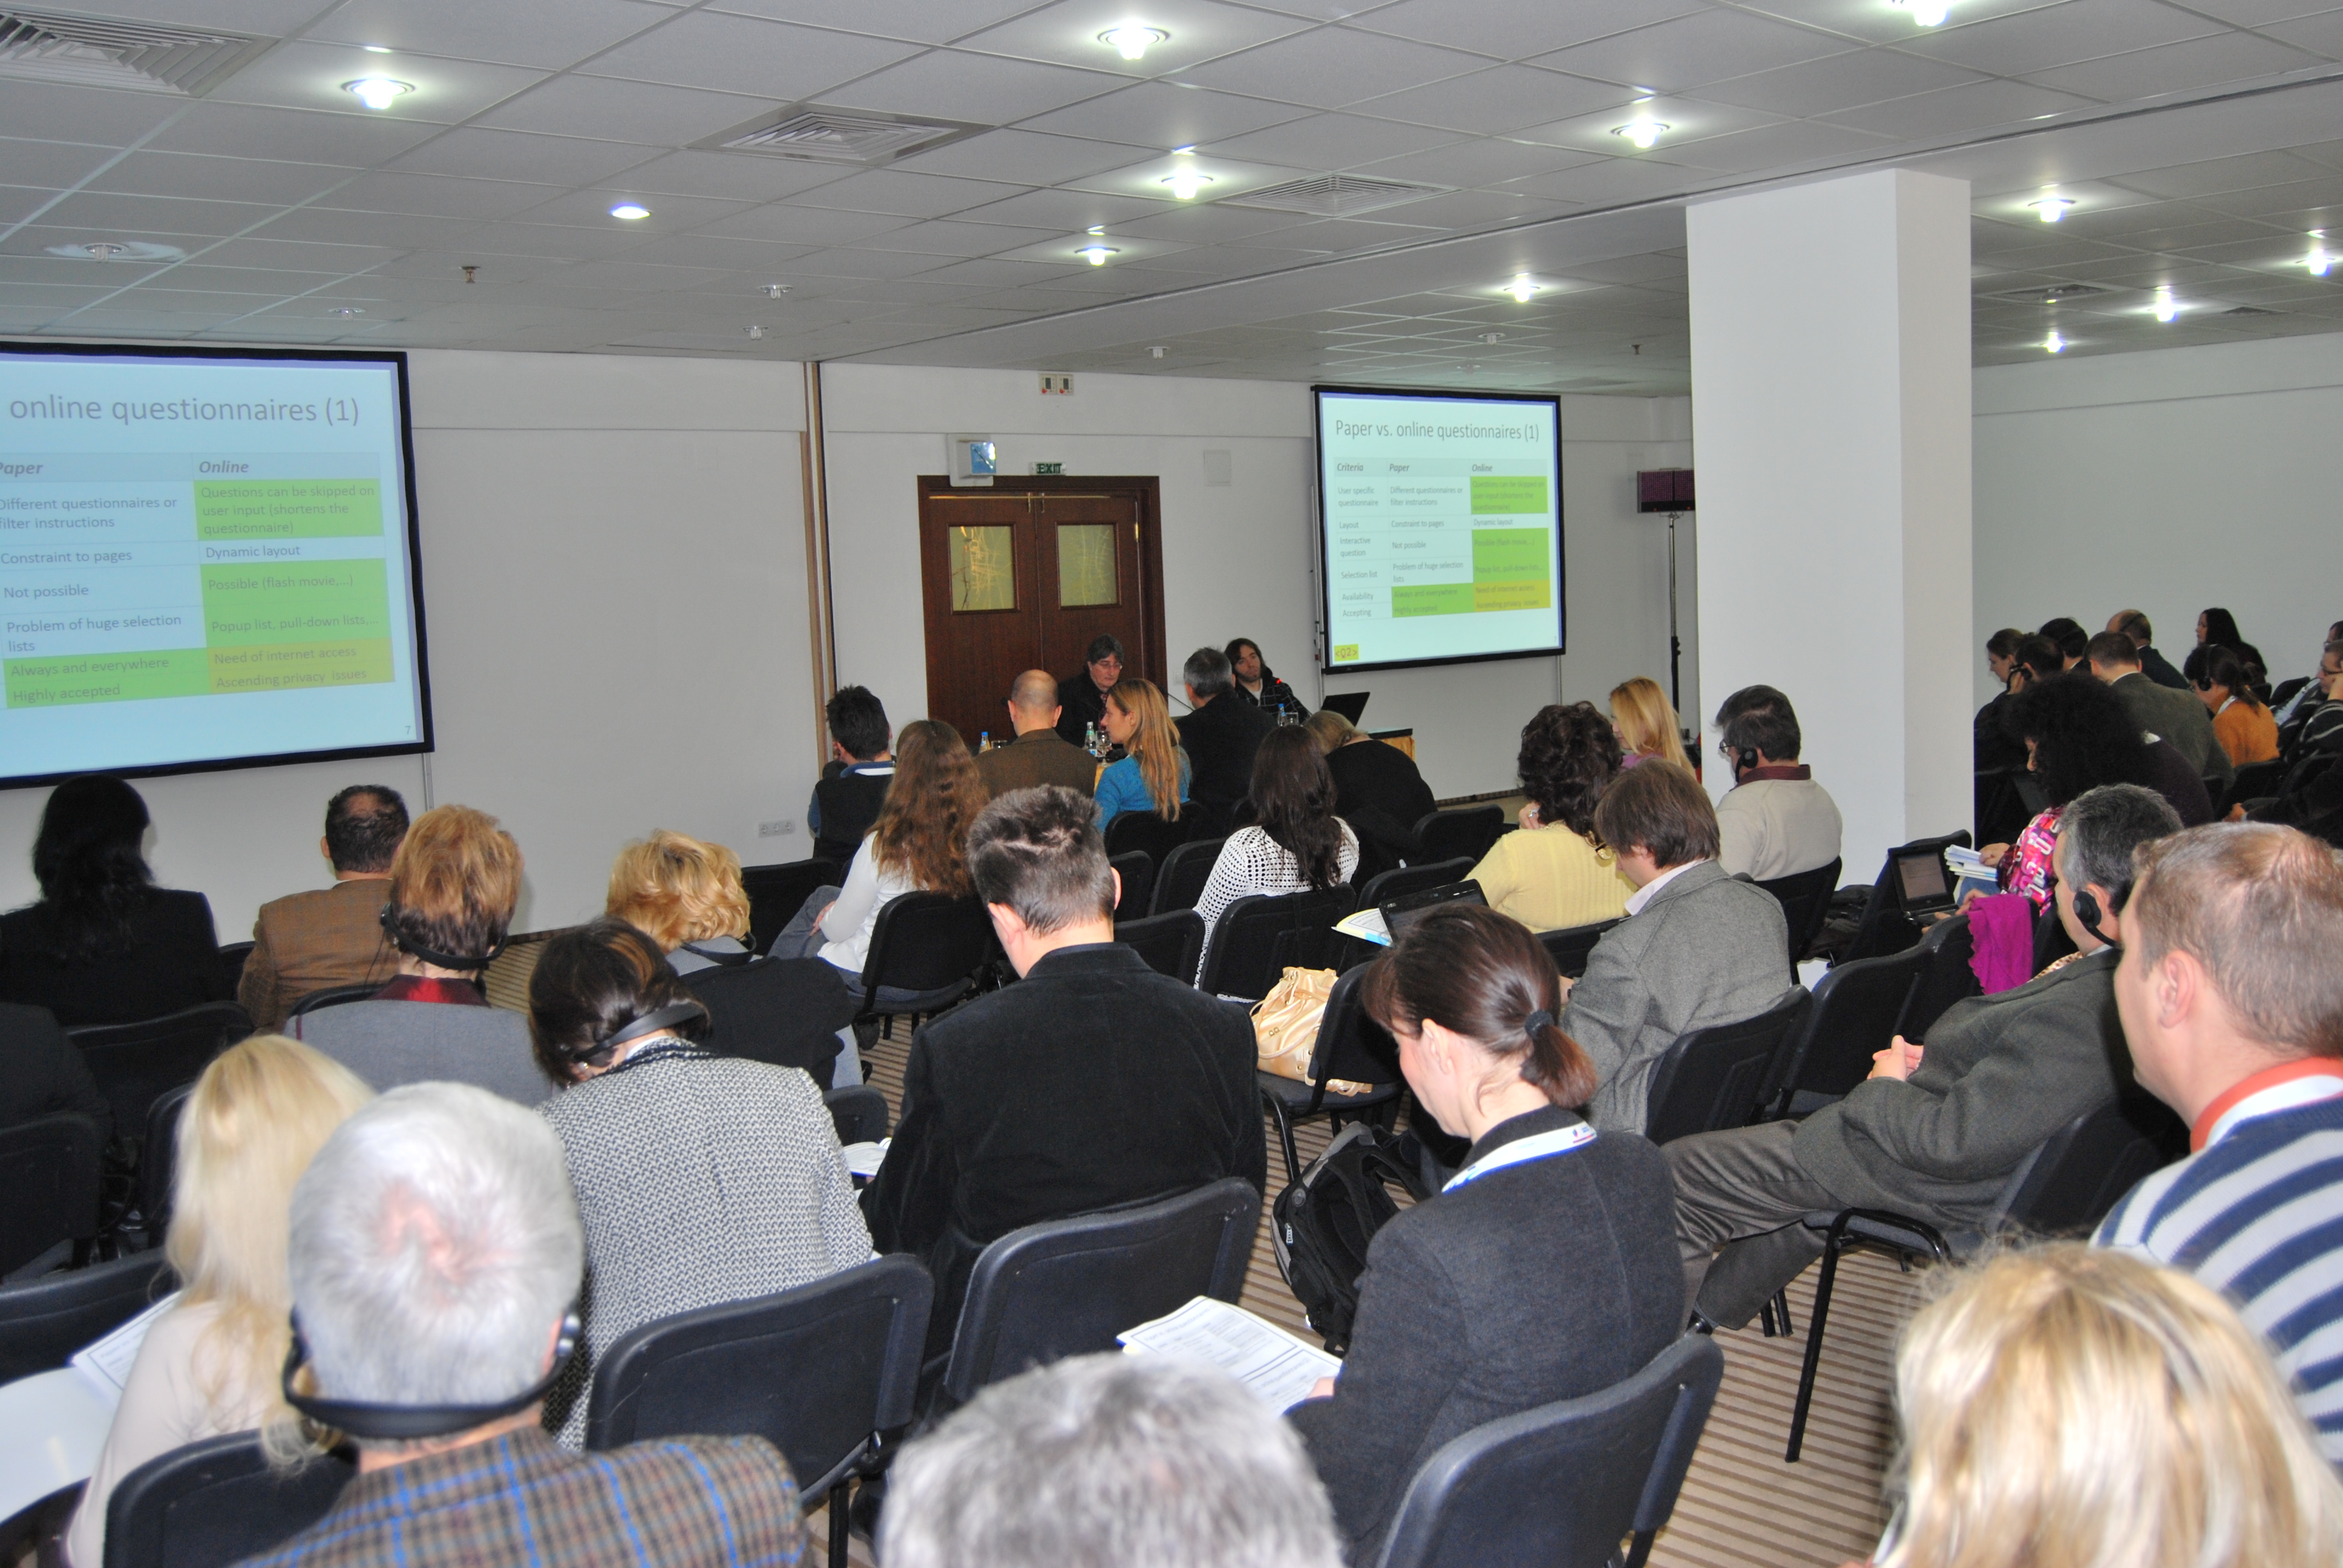 53 public and private universities attended the workshop 